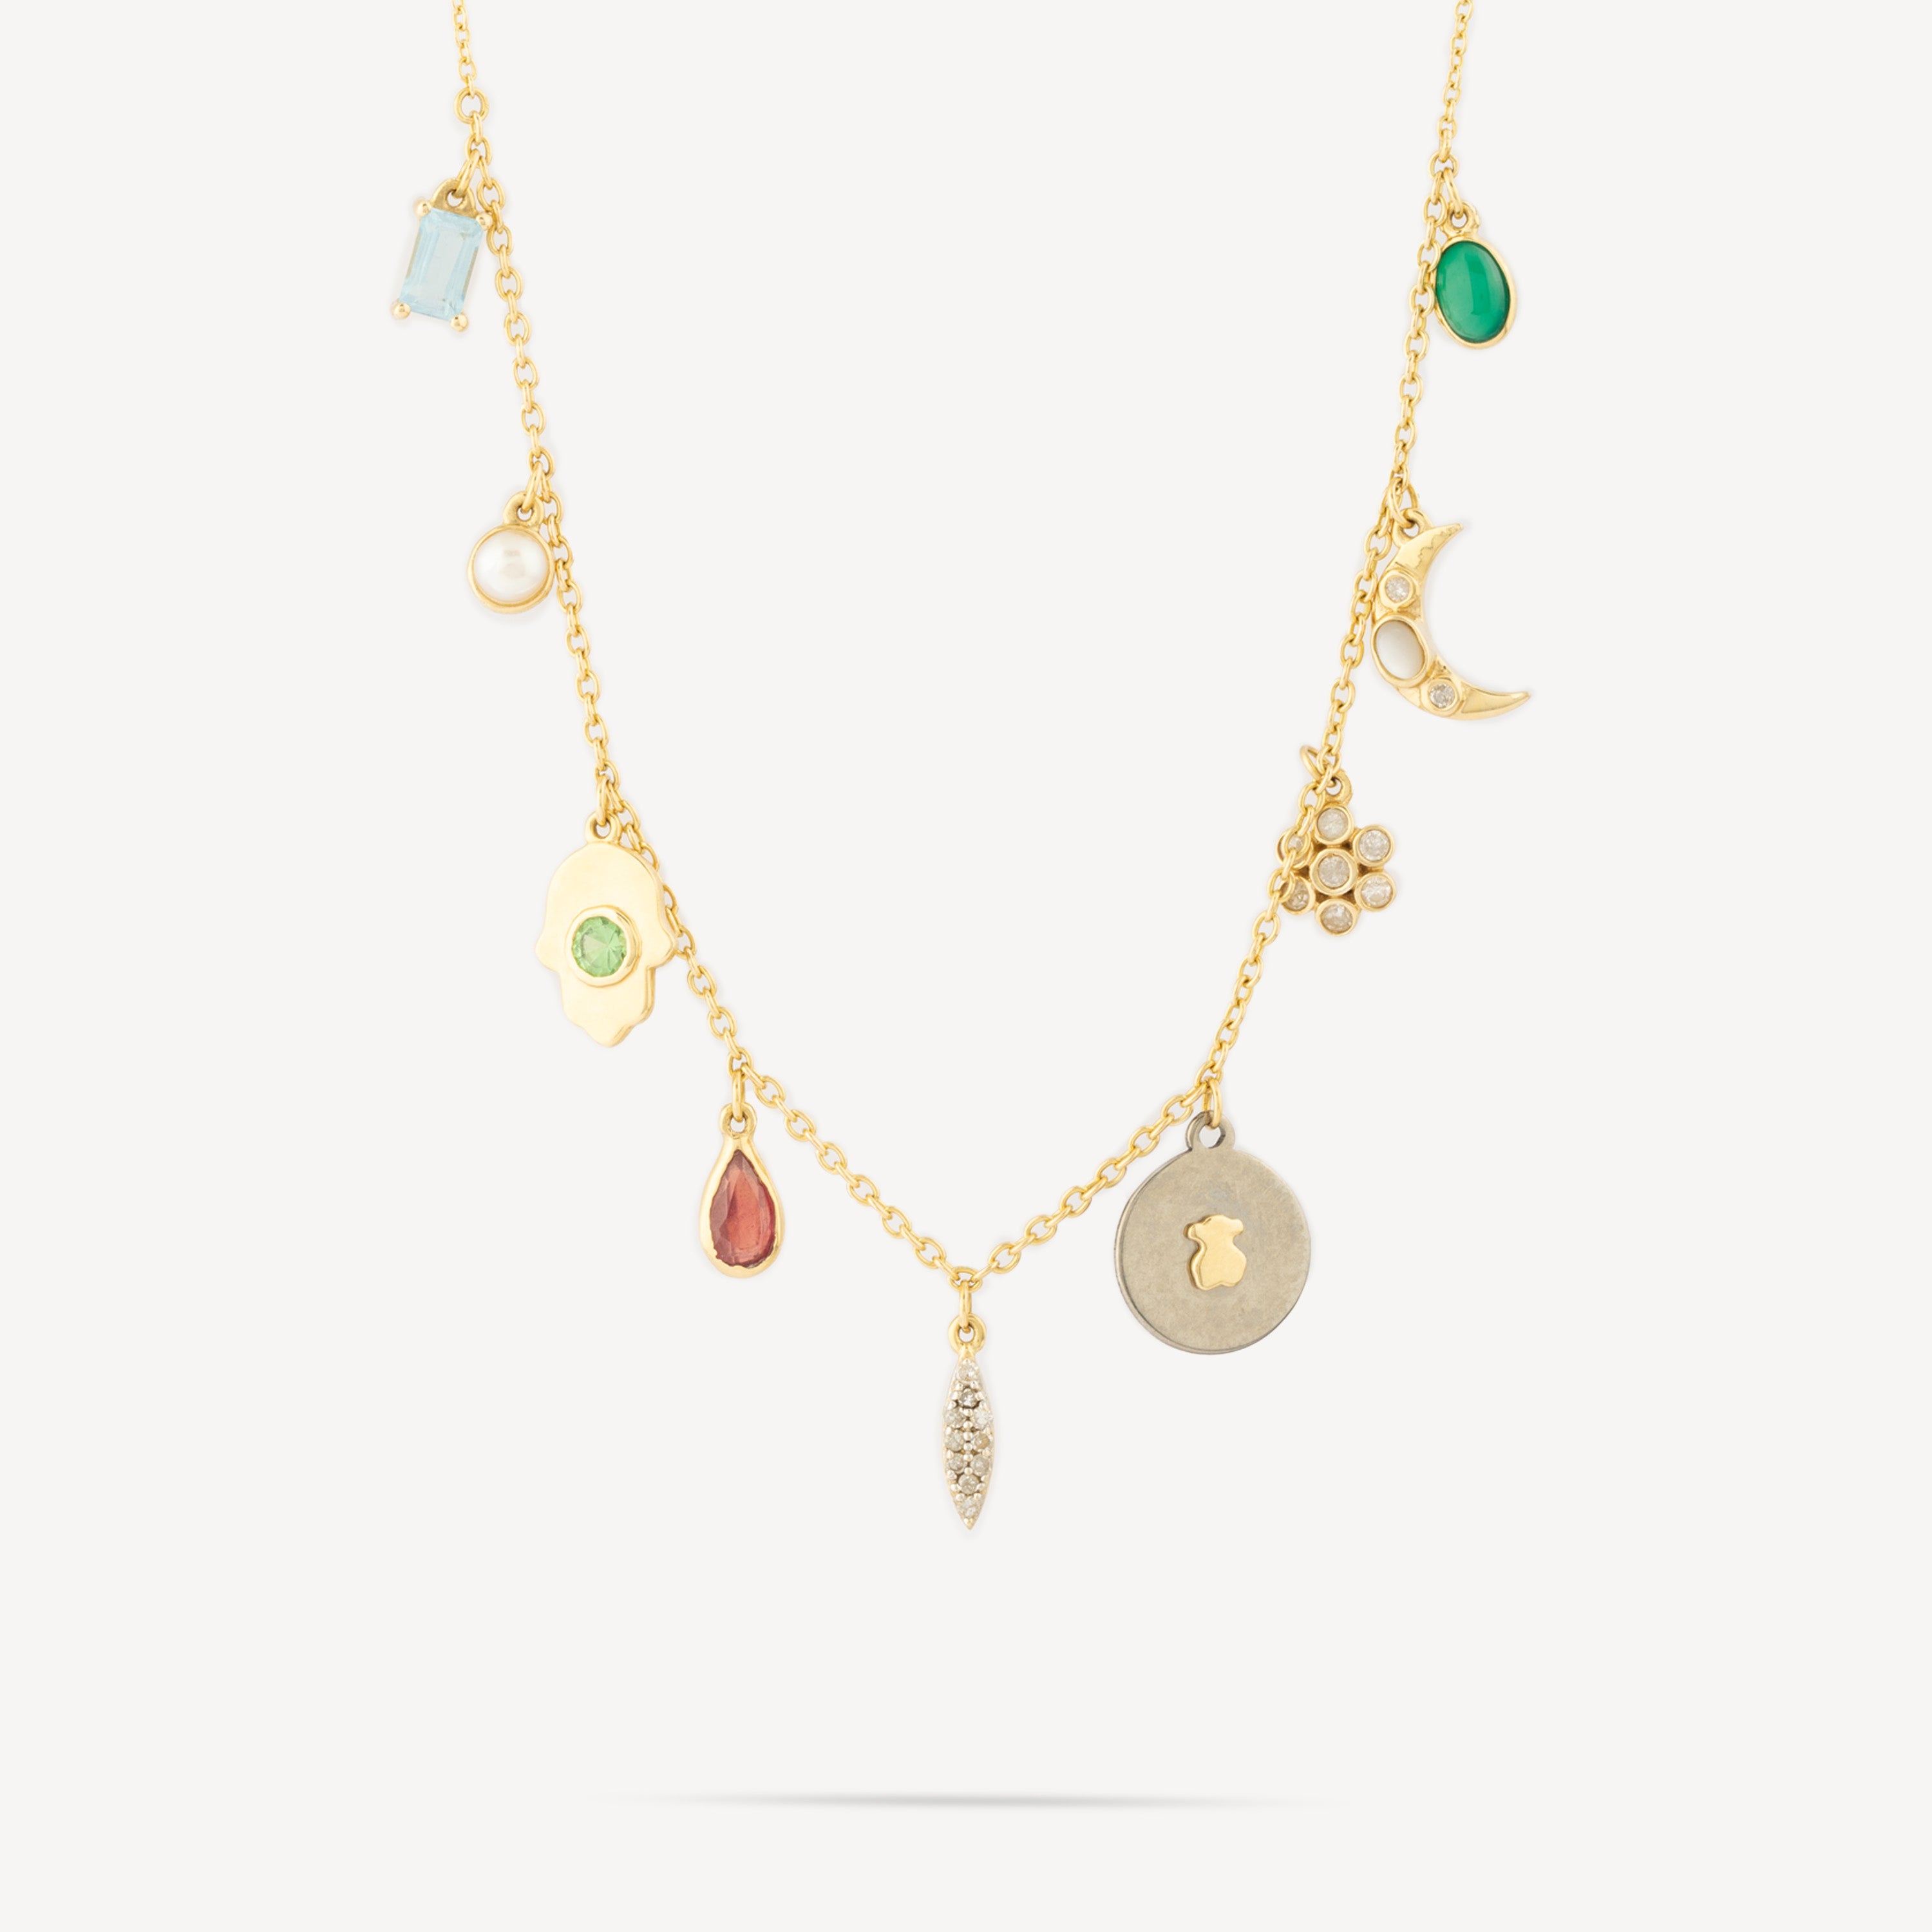 Gem Power Necklace in Gold